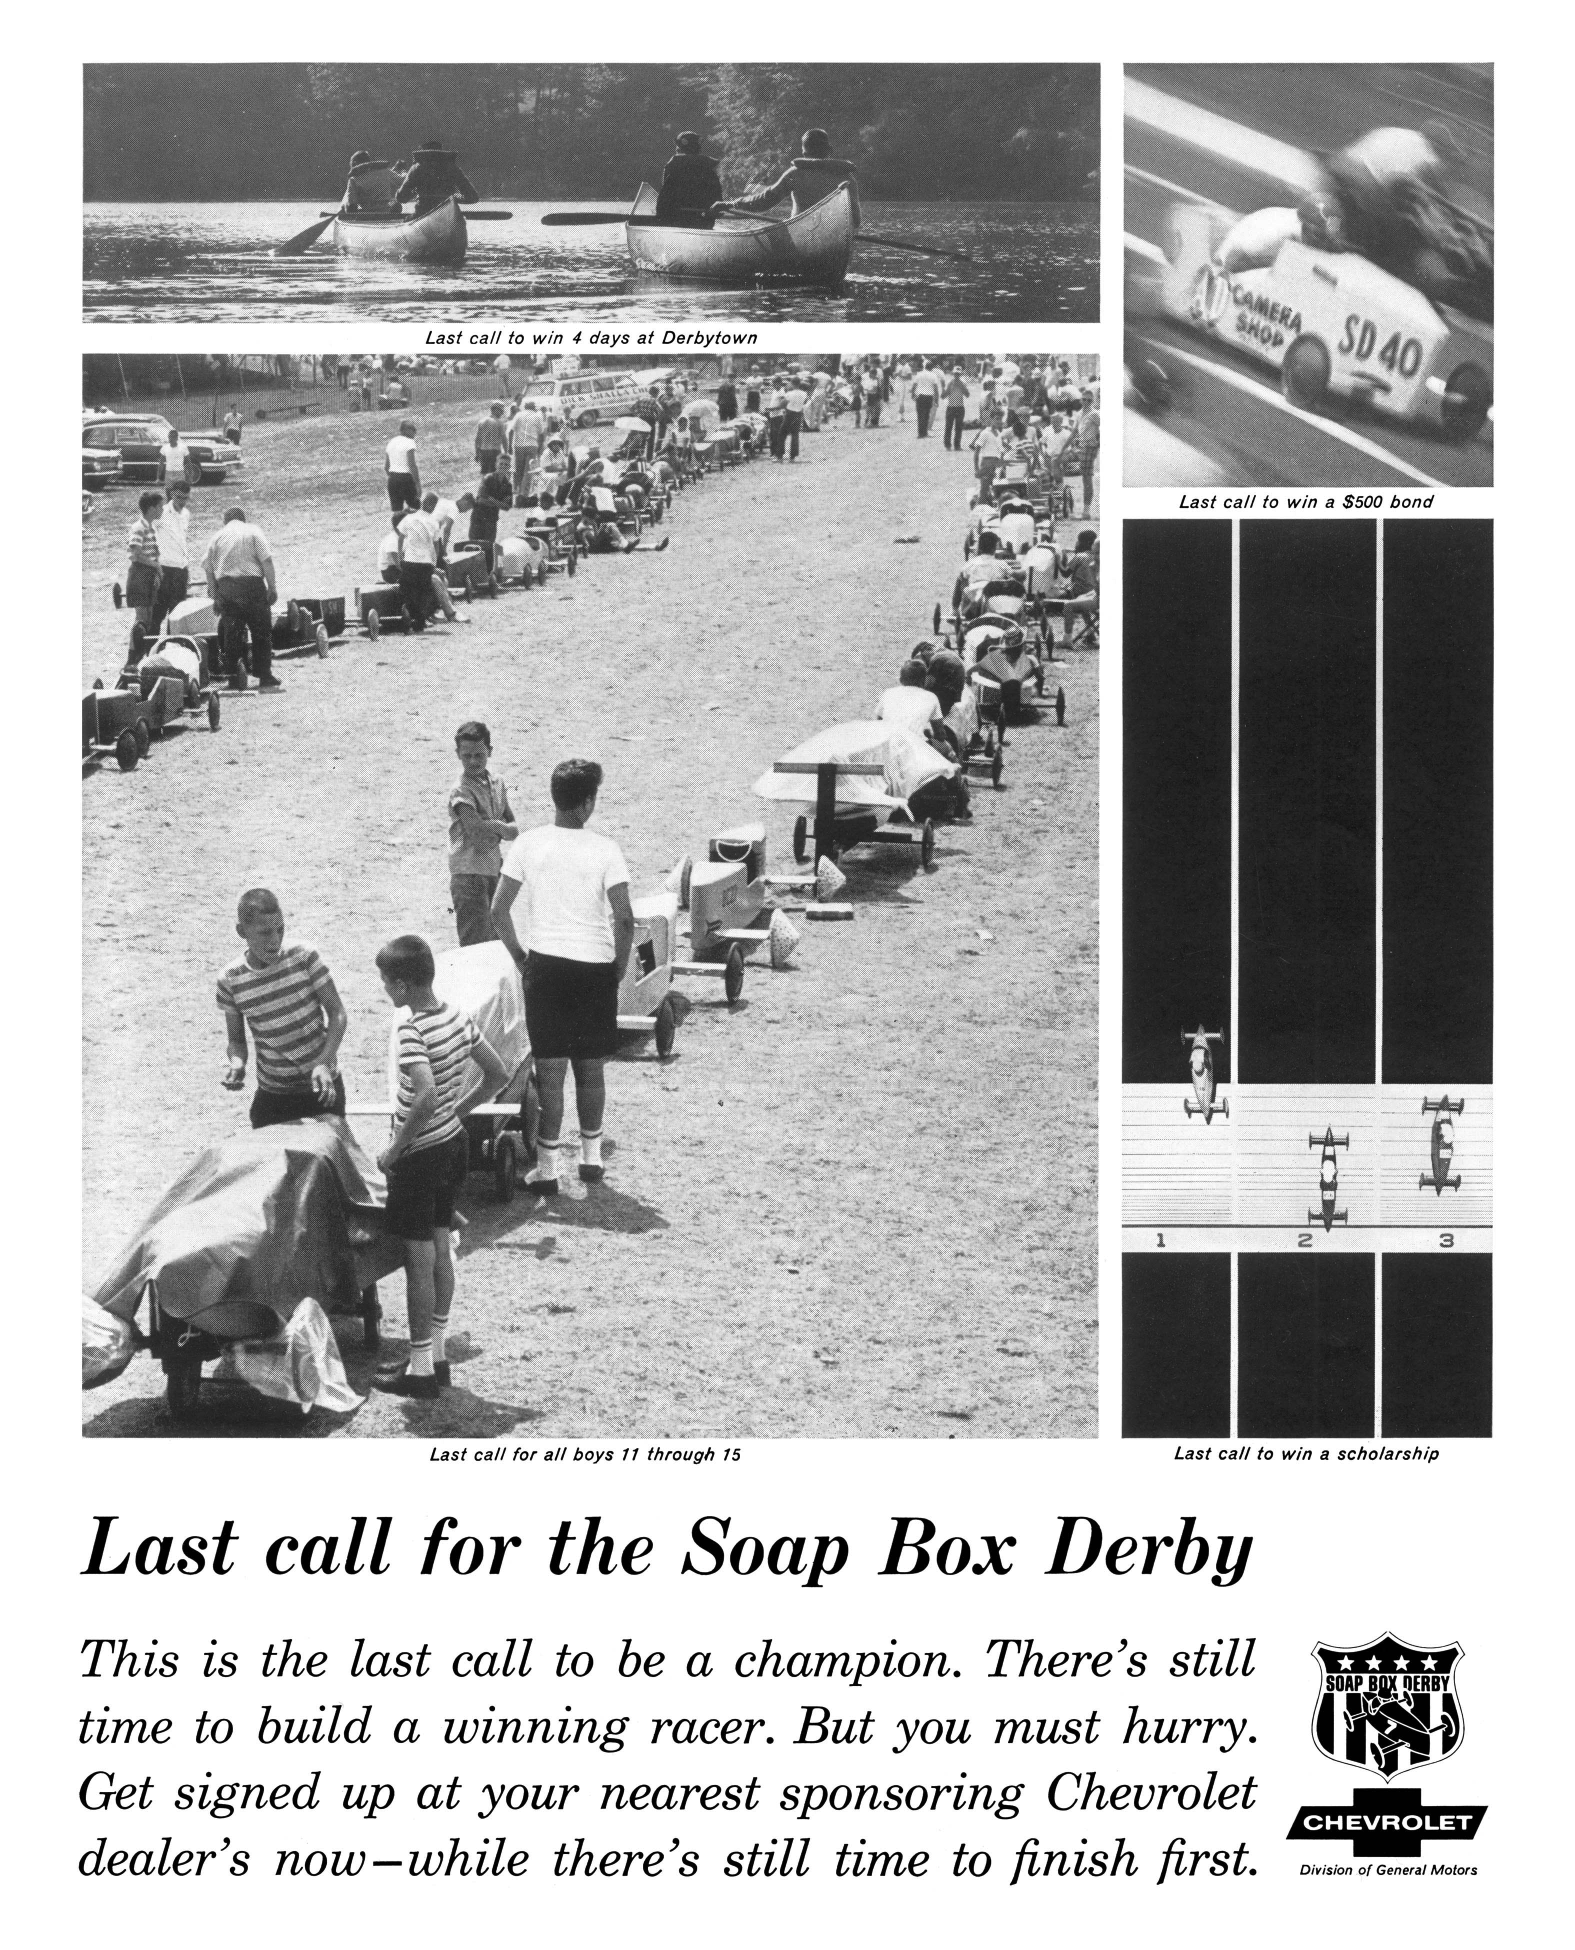 1965 Chevrolet Ad, Soap Box Derby, “Last call for the Soap Box Derby”